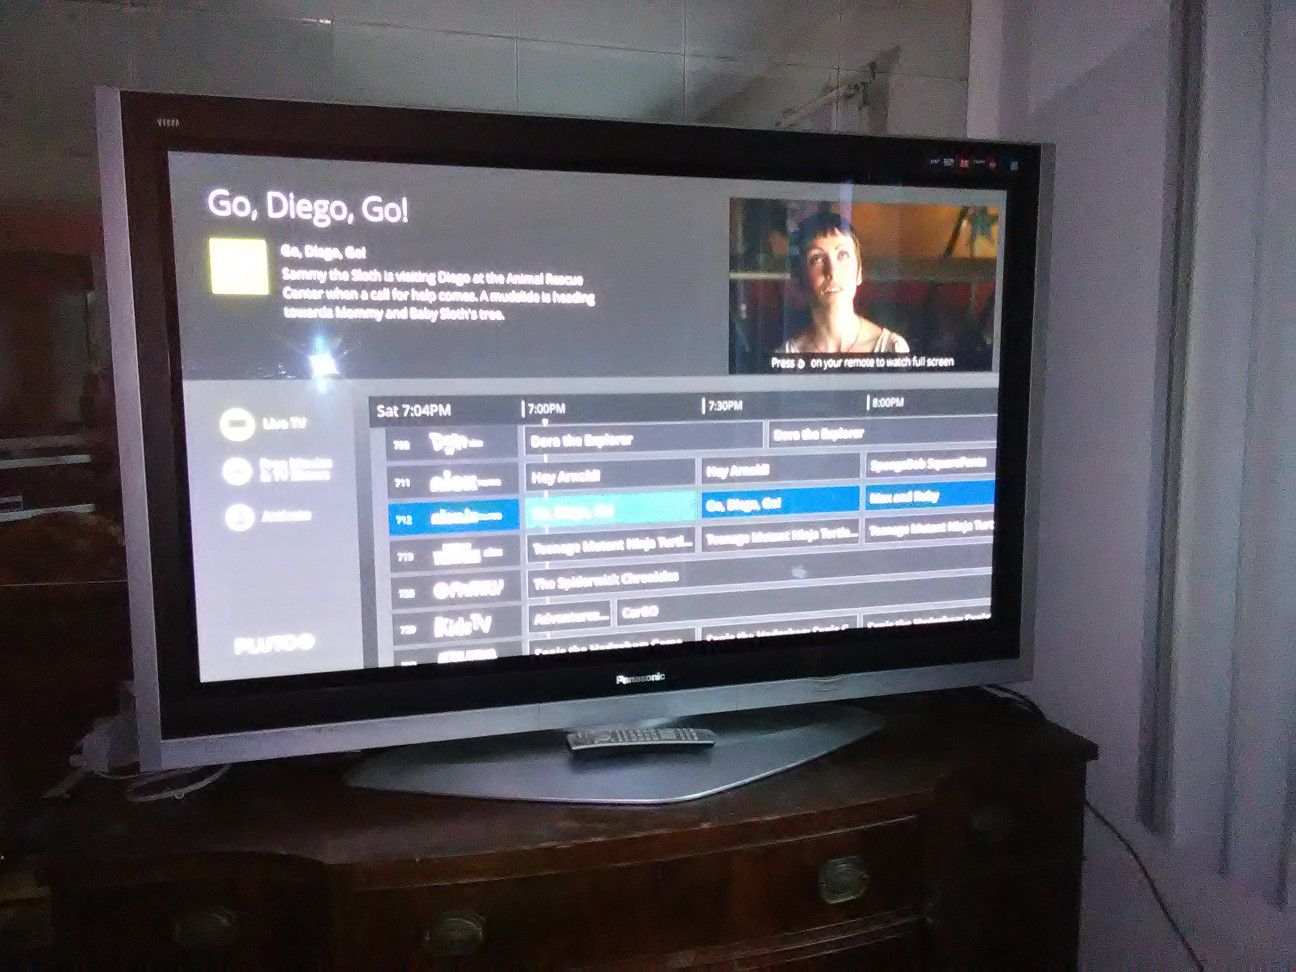 Panasonic 60 inch Smart TV with remote control and 2 HDMI ports